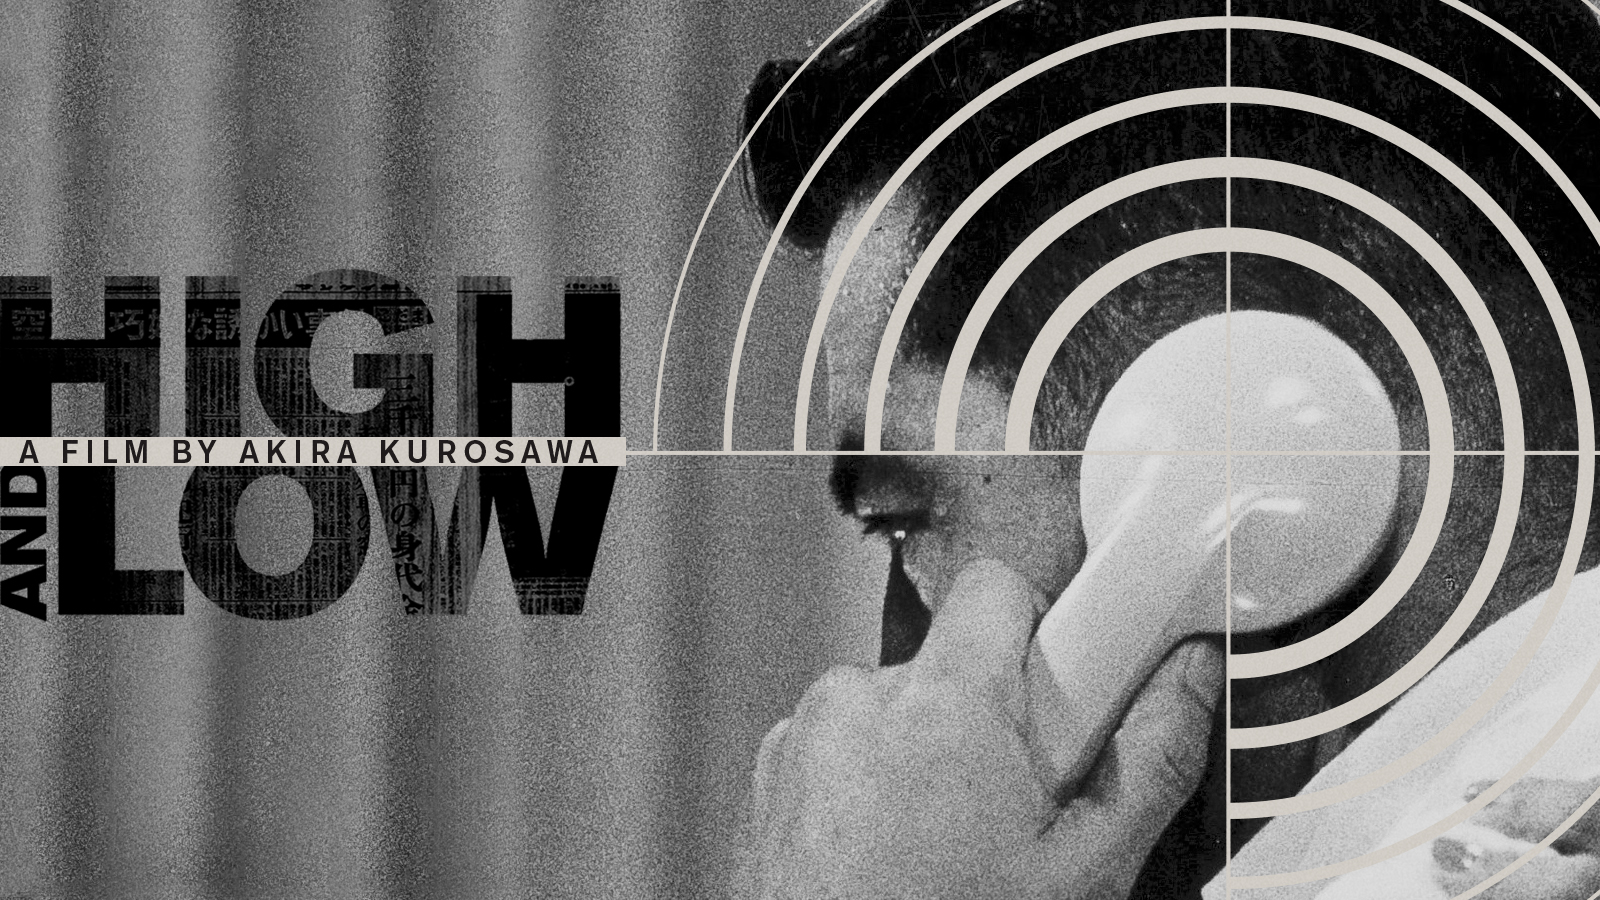 Criterion Collection: High & Low (黒澤明 天国と地獄 北米版) [Blu-ray]